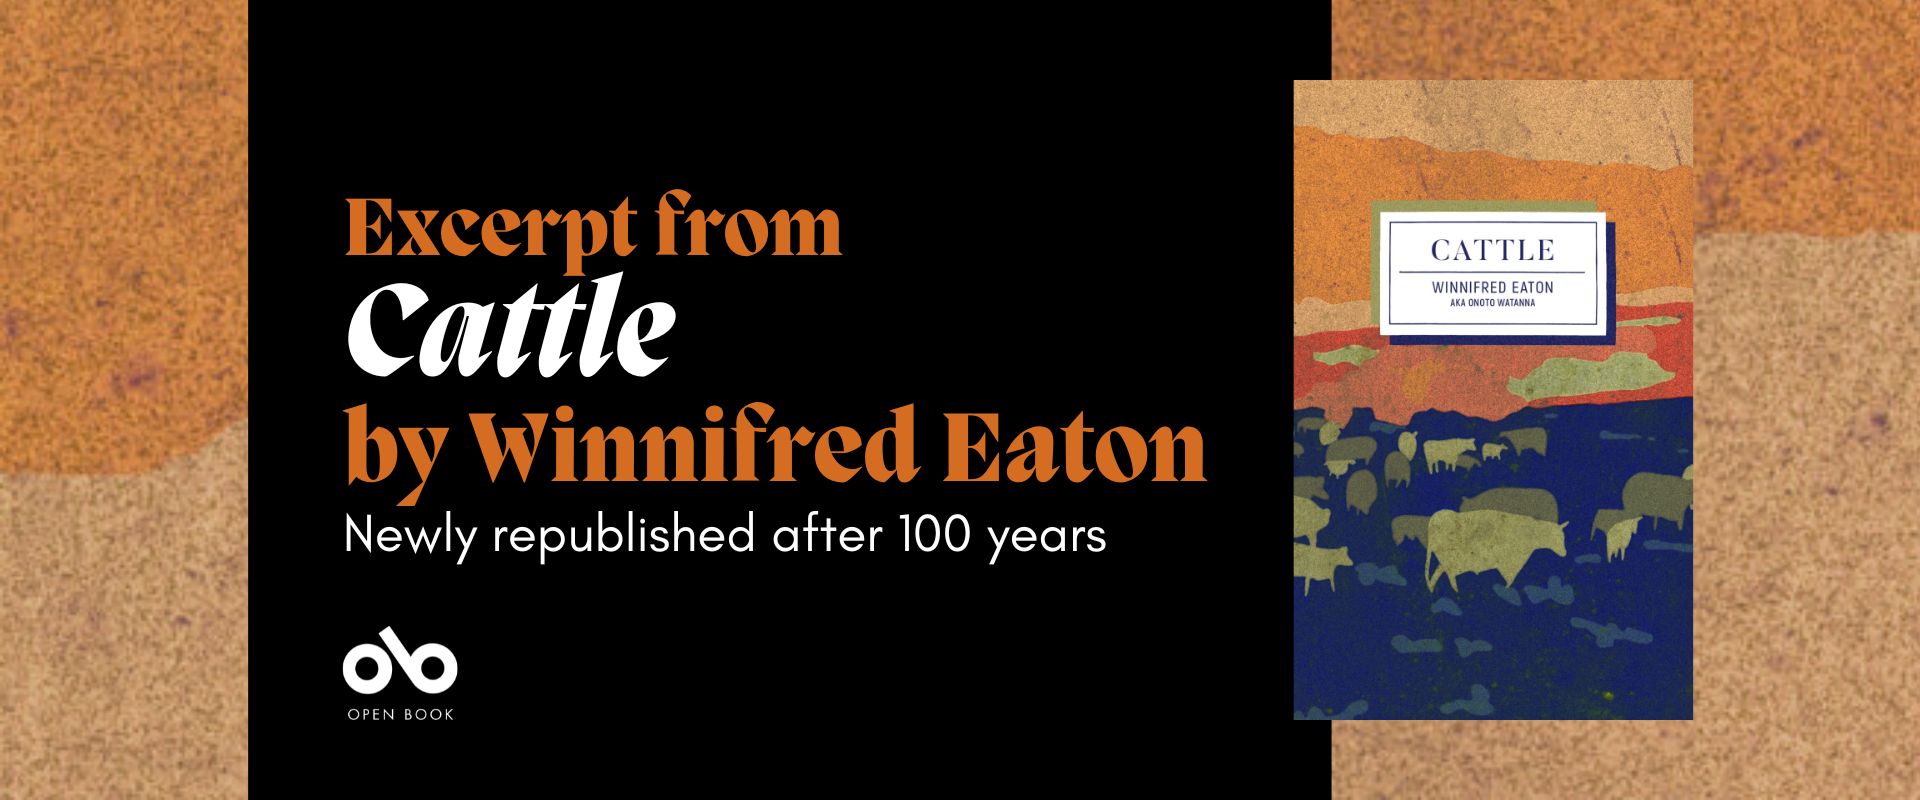 Orange and black banner image with the cover of Cattle by Winnifred Eaton on the right and text on the left reading "Excerpt from Cattle by Winnifred Eaton. Newly republished after 100 years". Open Book logo bottom left.